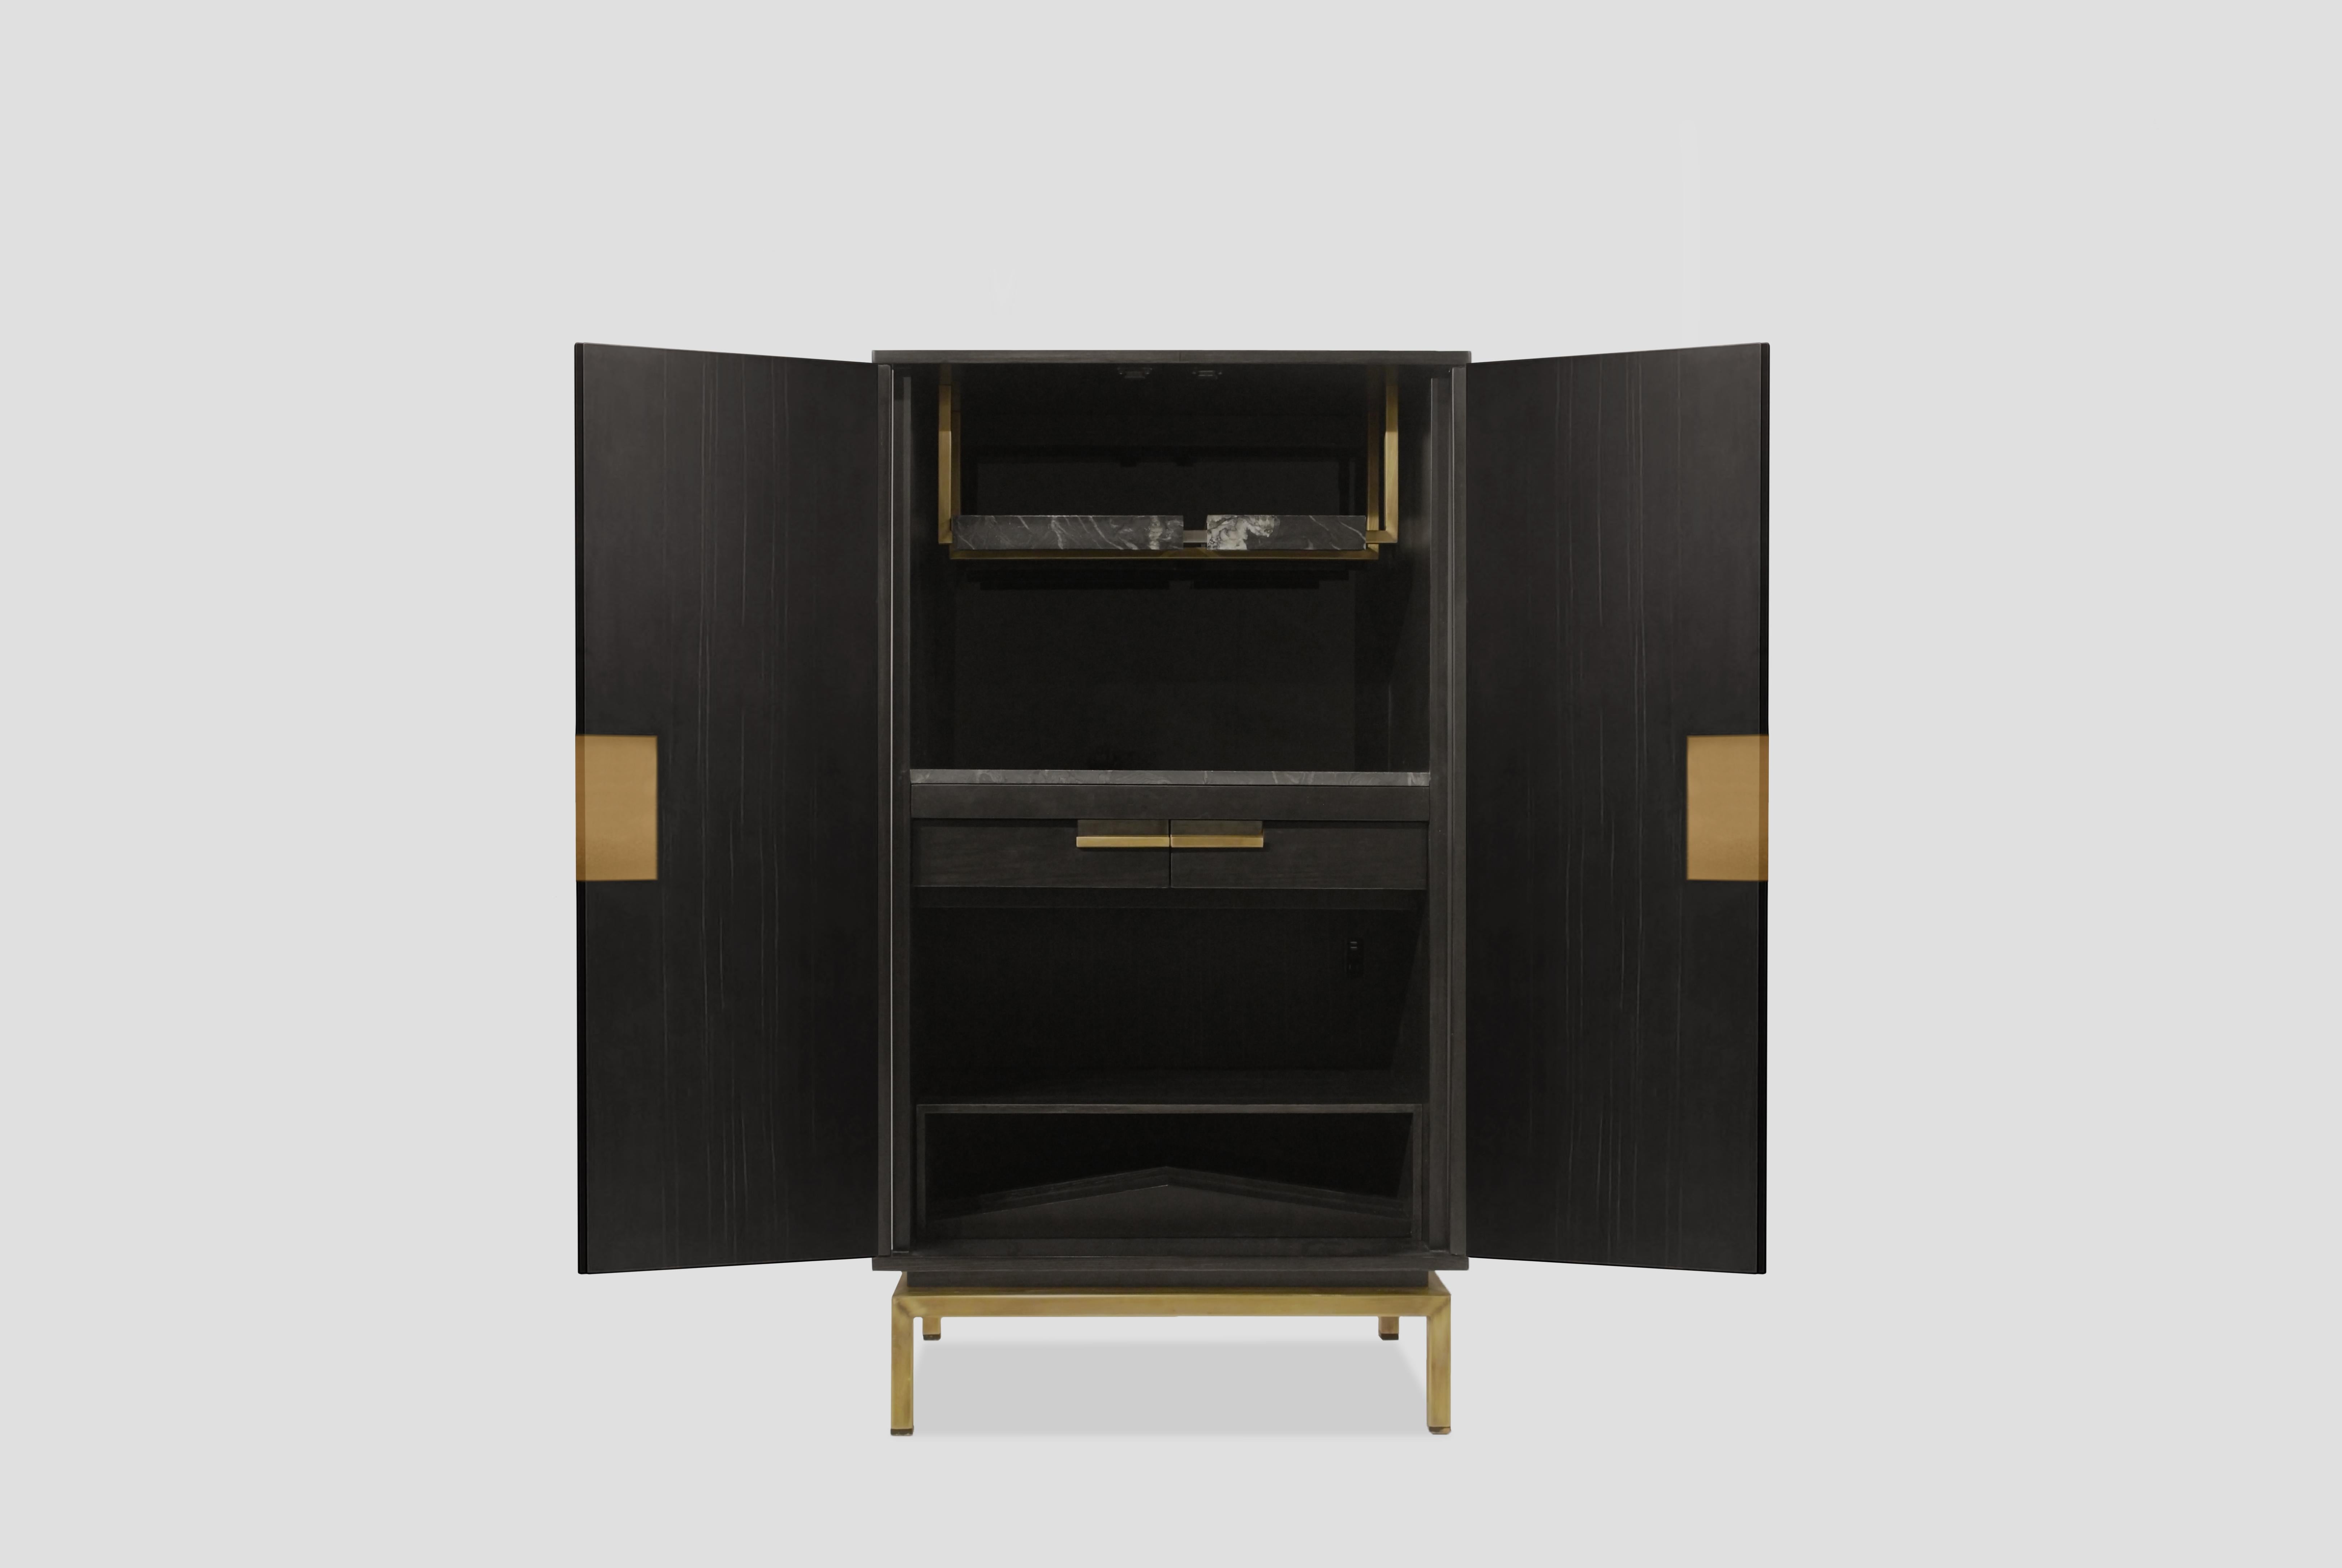 Our Architecture and Cabinetry furniture collection is a collaboration with the most renowned Mexican architects. In this collection we explore, through signature cabinetmaking, the different meeting points between architecture and design.

Our